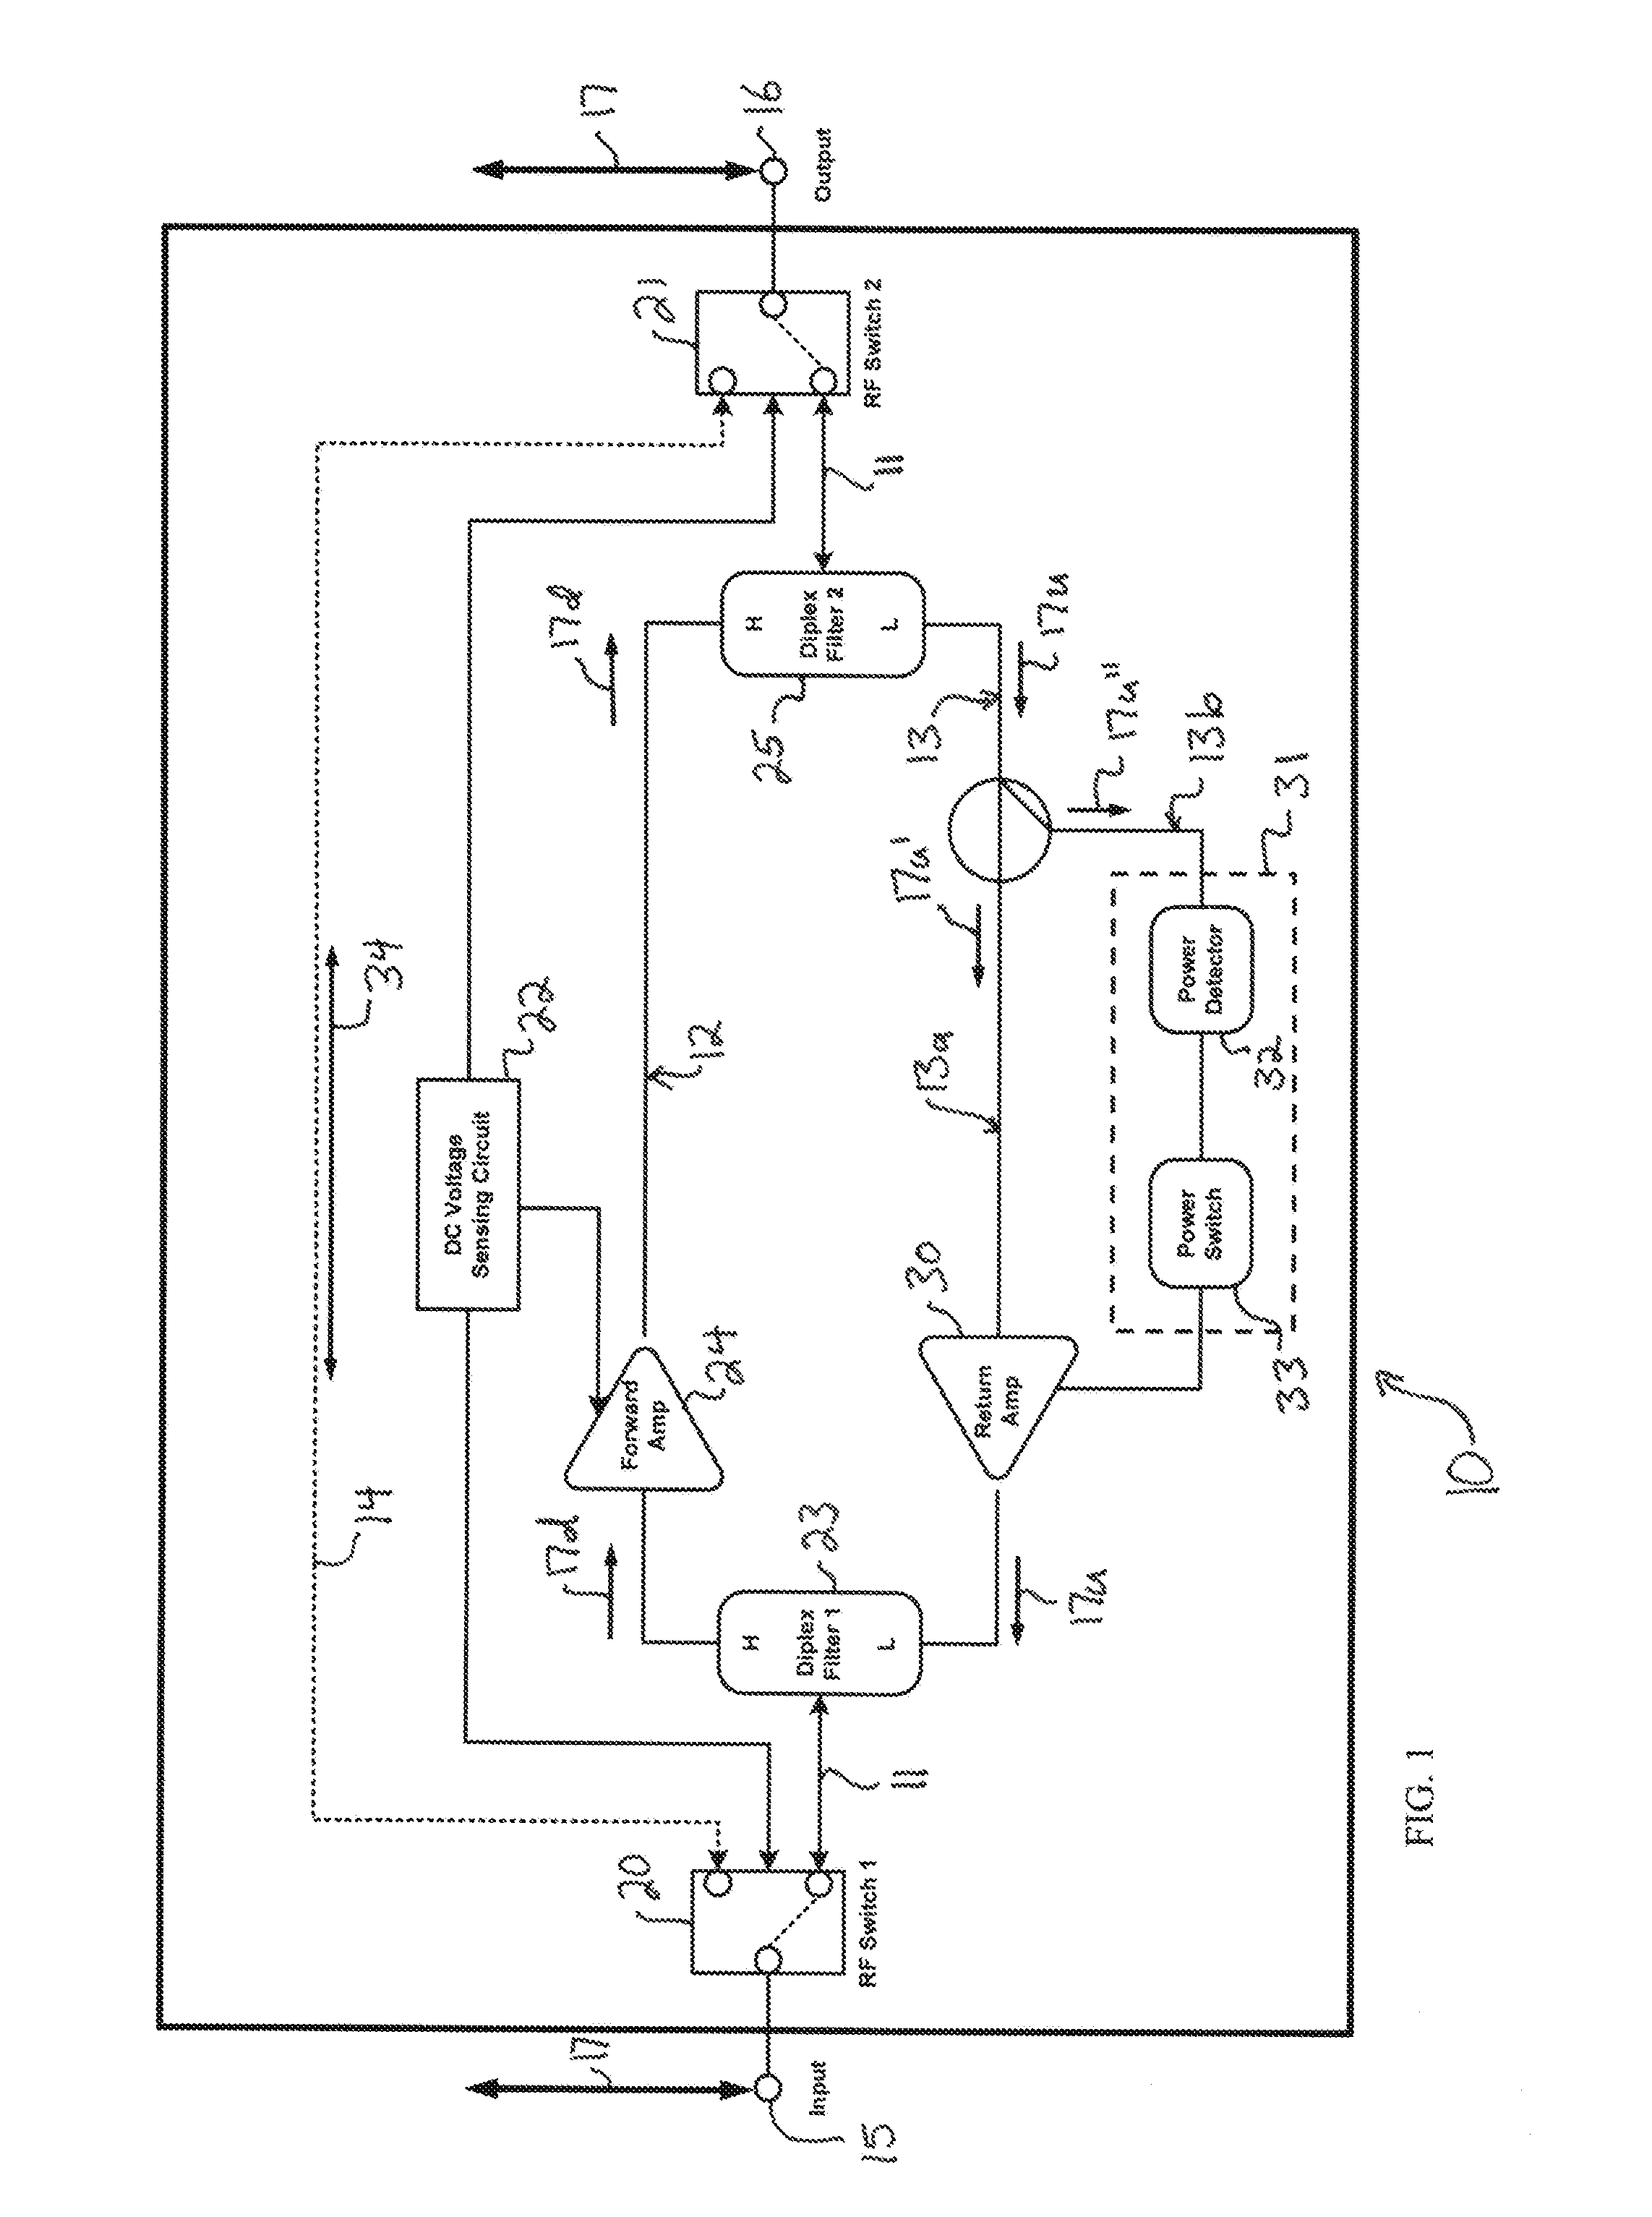 Return Path Noise Reducing Amplifier with Bypass Signal